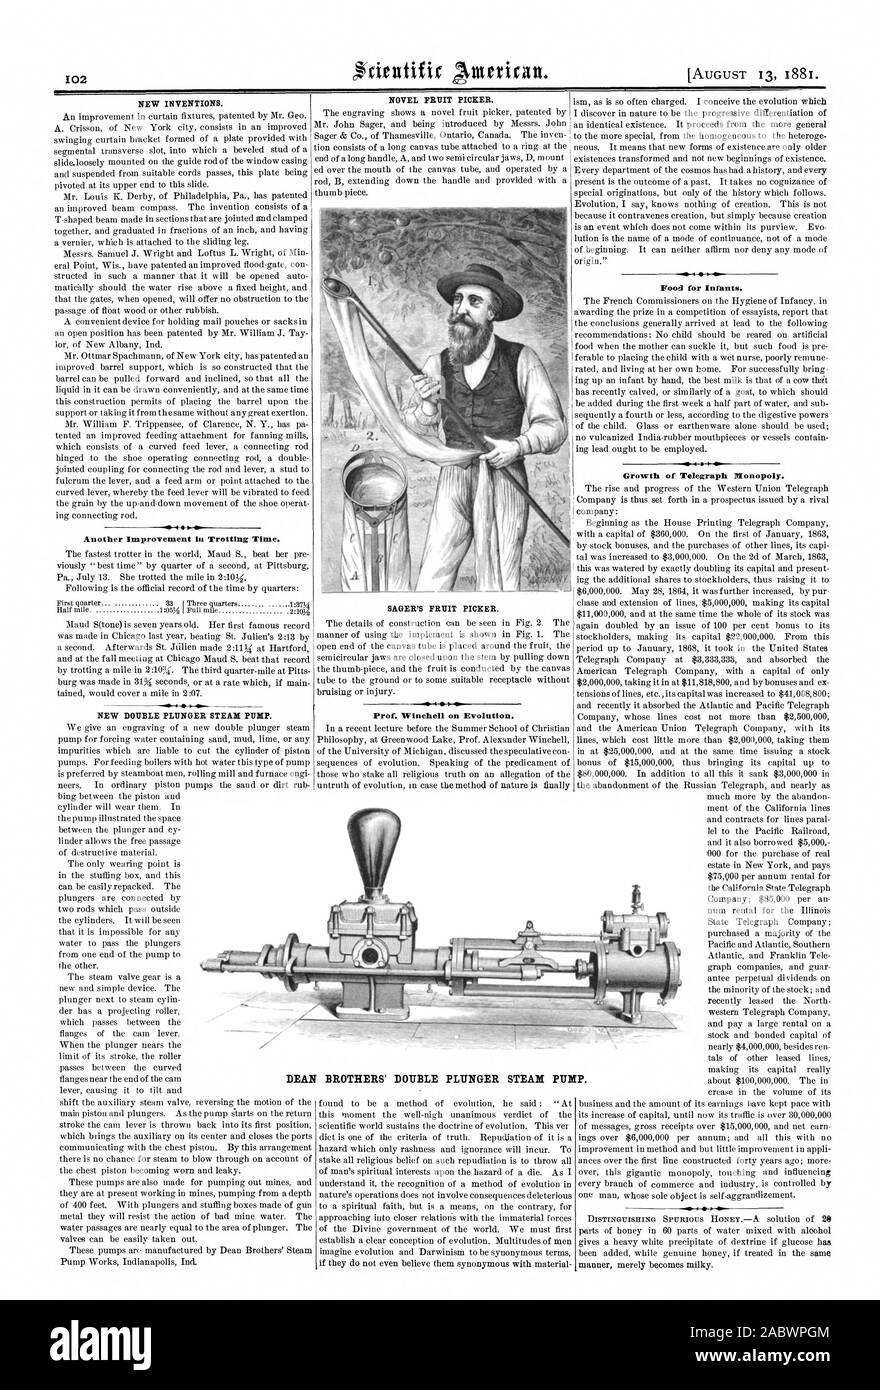 NEW INVENTIONS. Another Improvement iu Trotting Time. NEW DOUBLE PLUNGER STEAM PUMP. NOVEL FRUIT PICKER. SAGER'S FRUIT PICKER. Prof. Winehell on Evolution. Food for Infante. Growth of Telegraph Monopoly. DEAN BROTHERS' DOUBLE PLUNGER STEAM PUMP., scientific american, 1881-08-13 Stock Photo